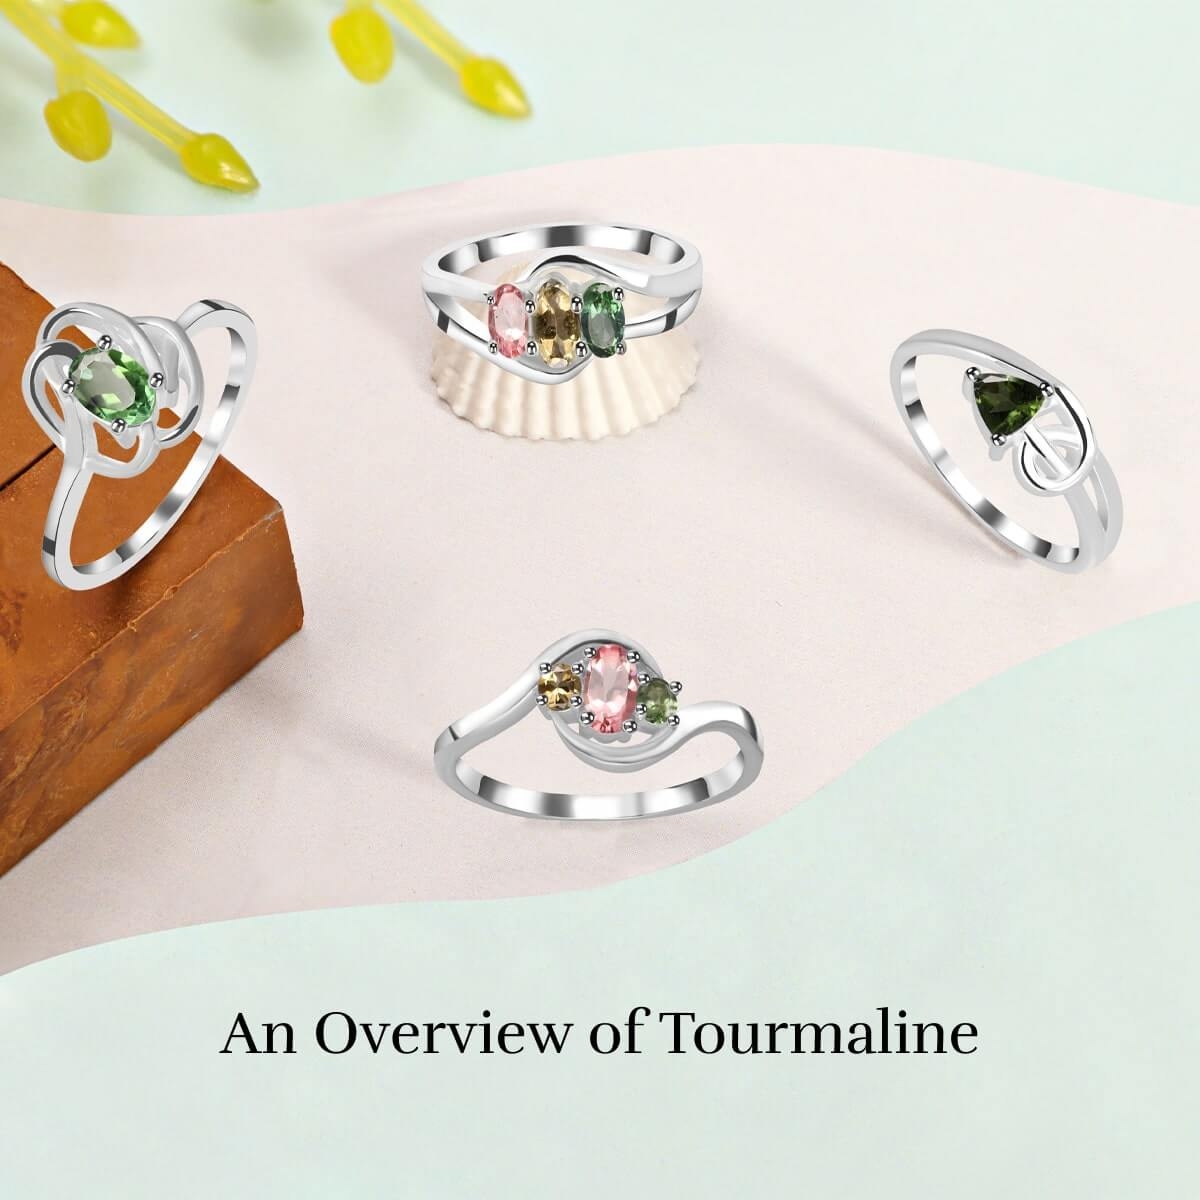 Tourmaline Stone : Meanings, Properties, Benefits and More